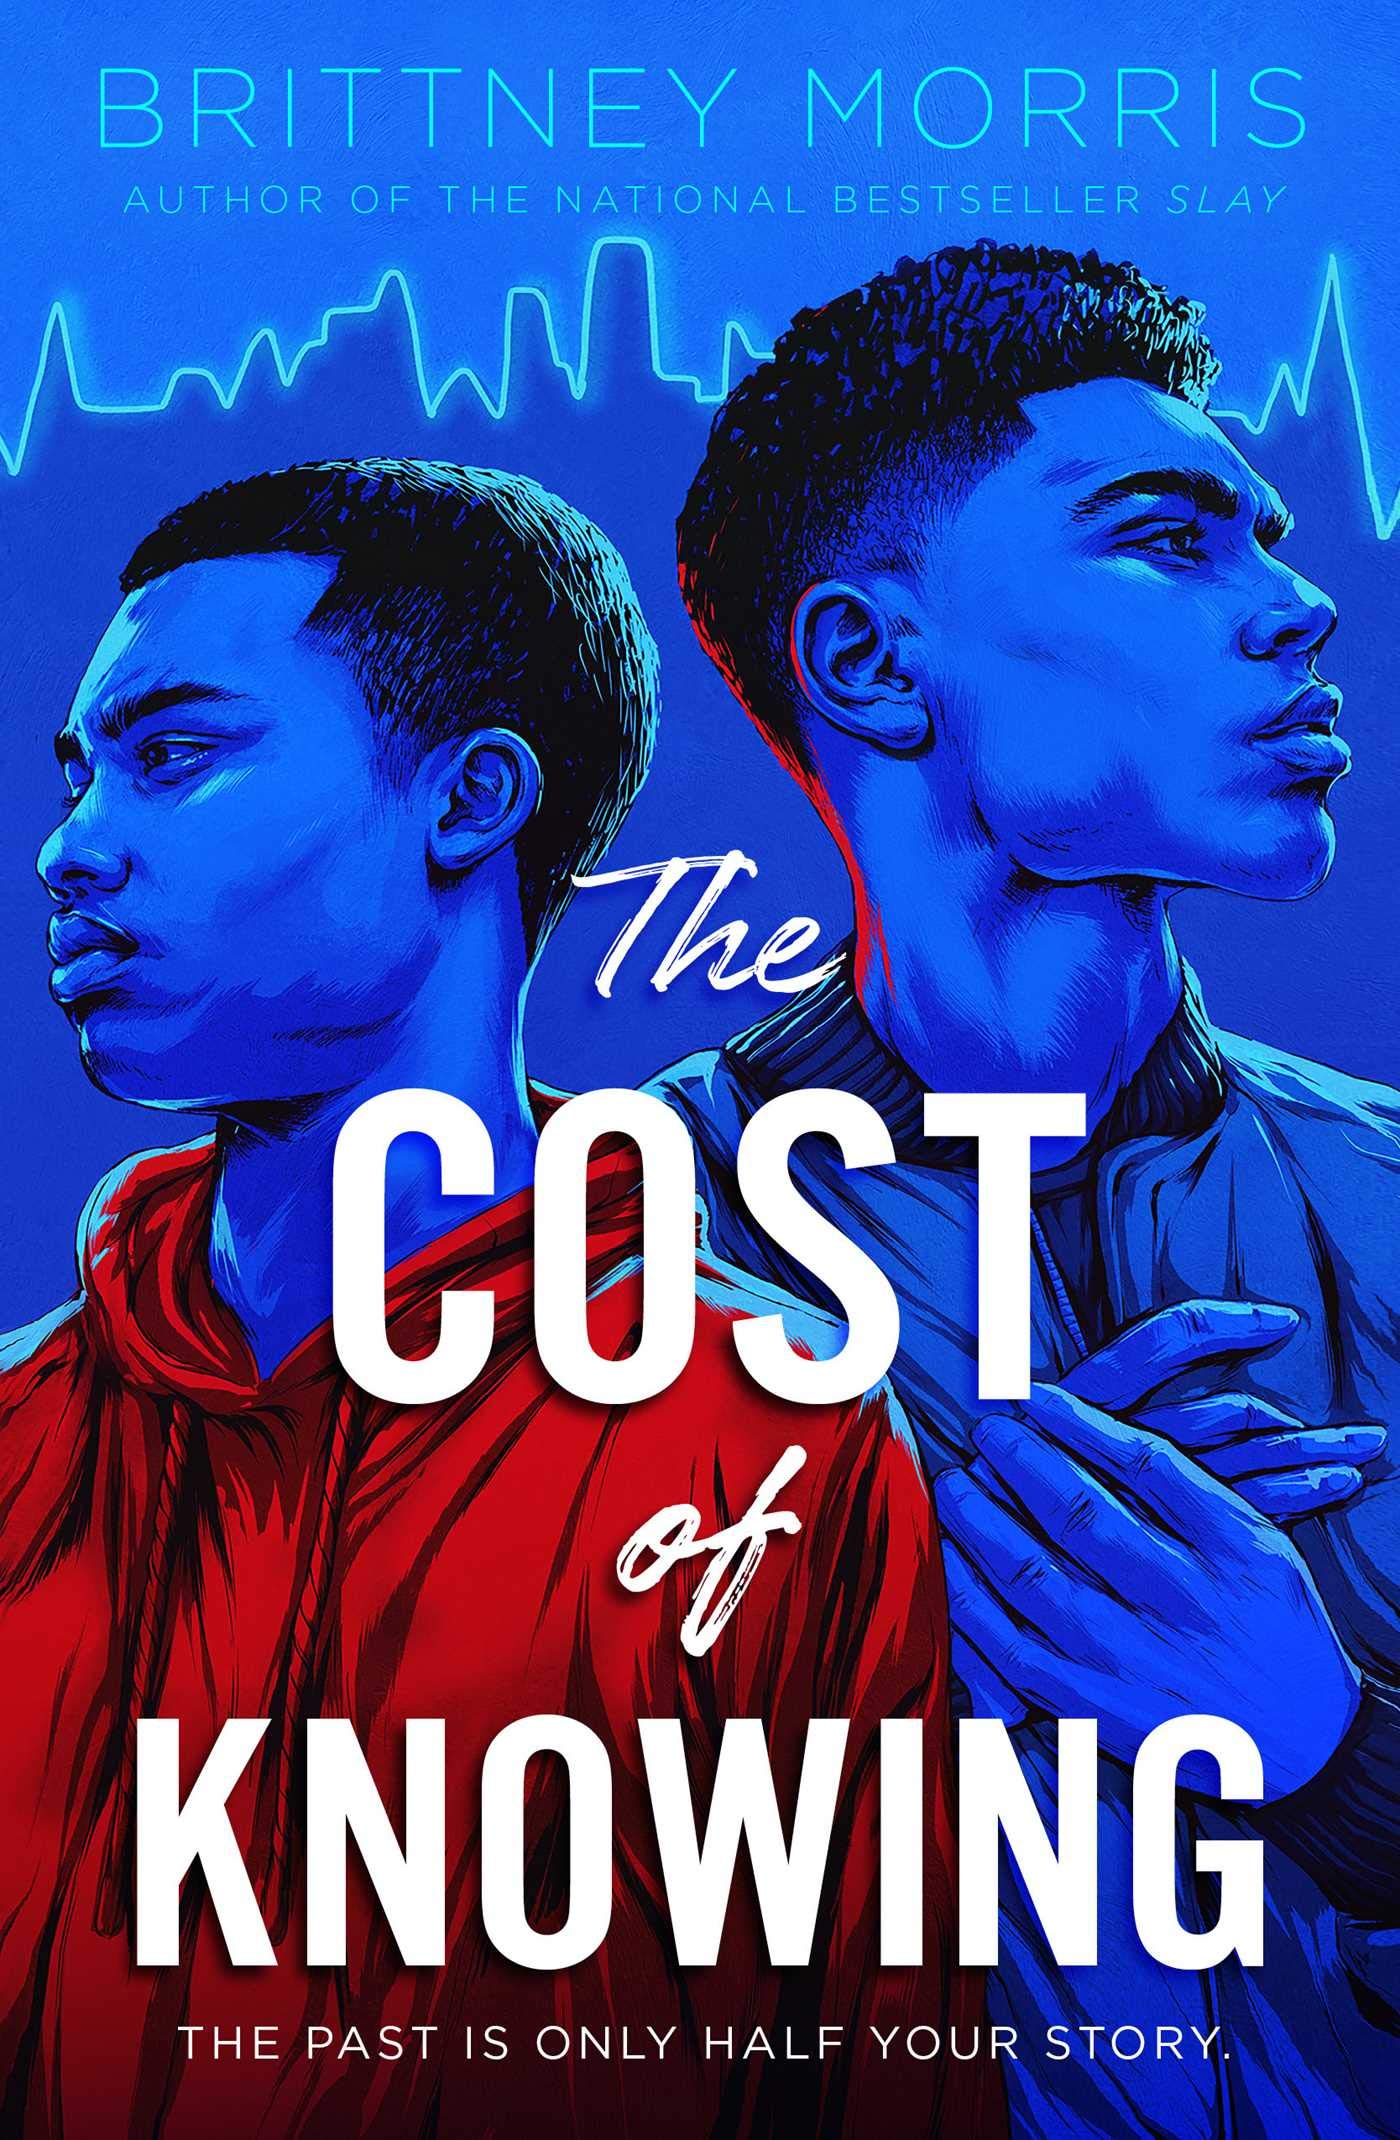 Image for "The Cost of Knowing"